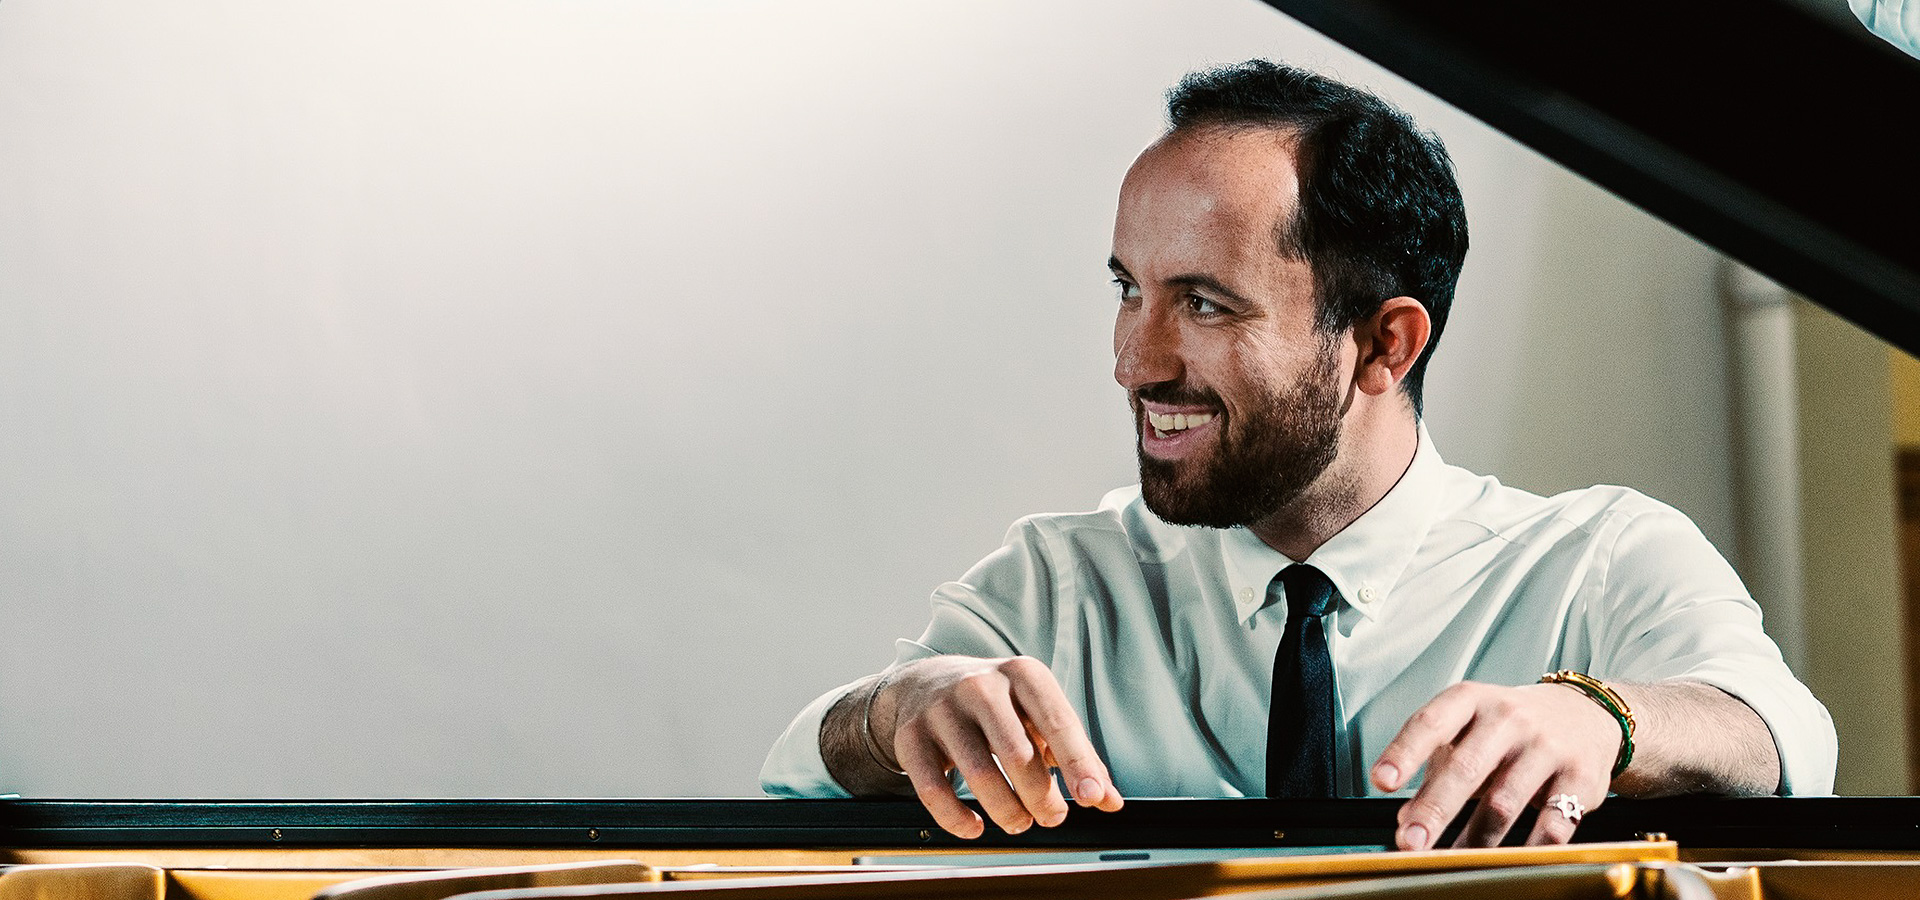 Igor Levit smiles and looks to his right as he sits in front of a piano in a white dress shirt and black tie.